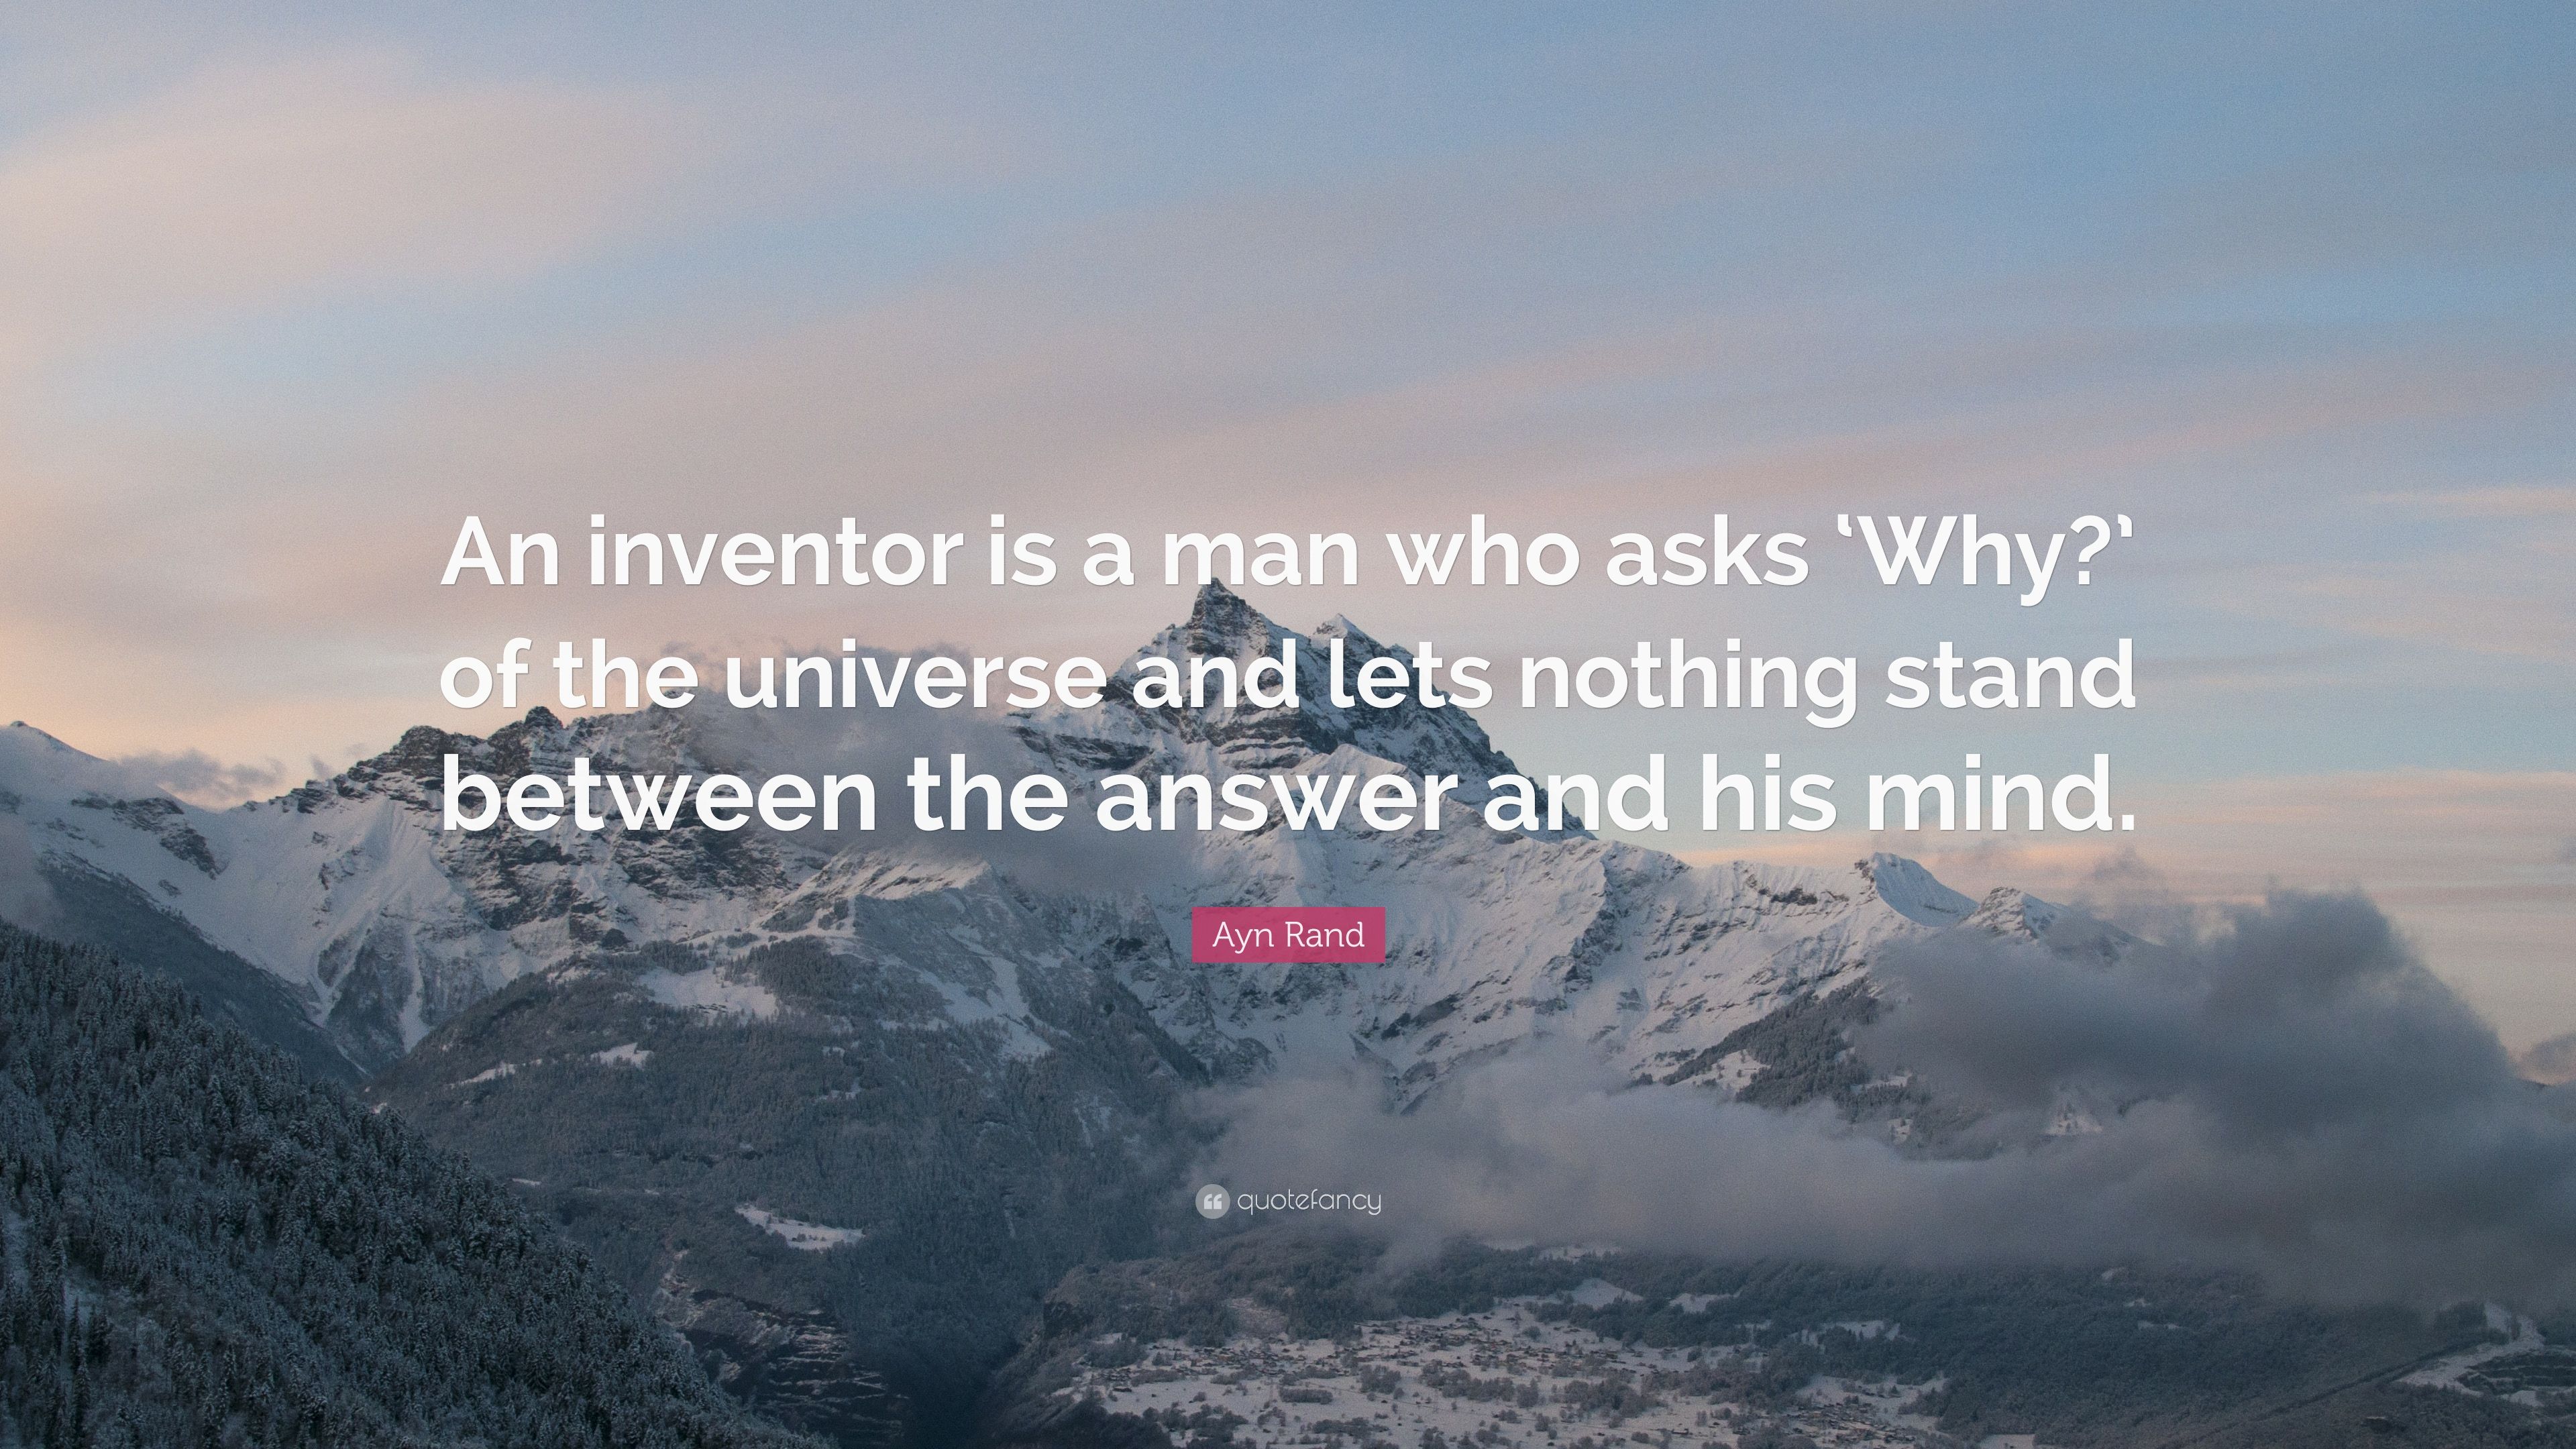 Ayn Rand Quote: “An inventor is a man who asks 'Why?'